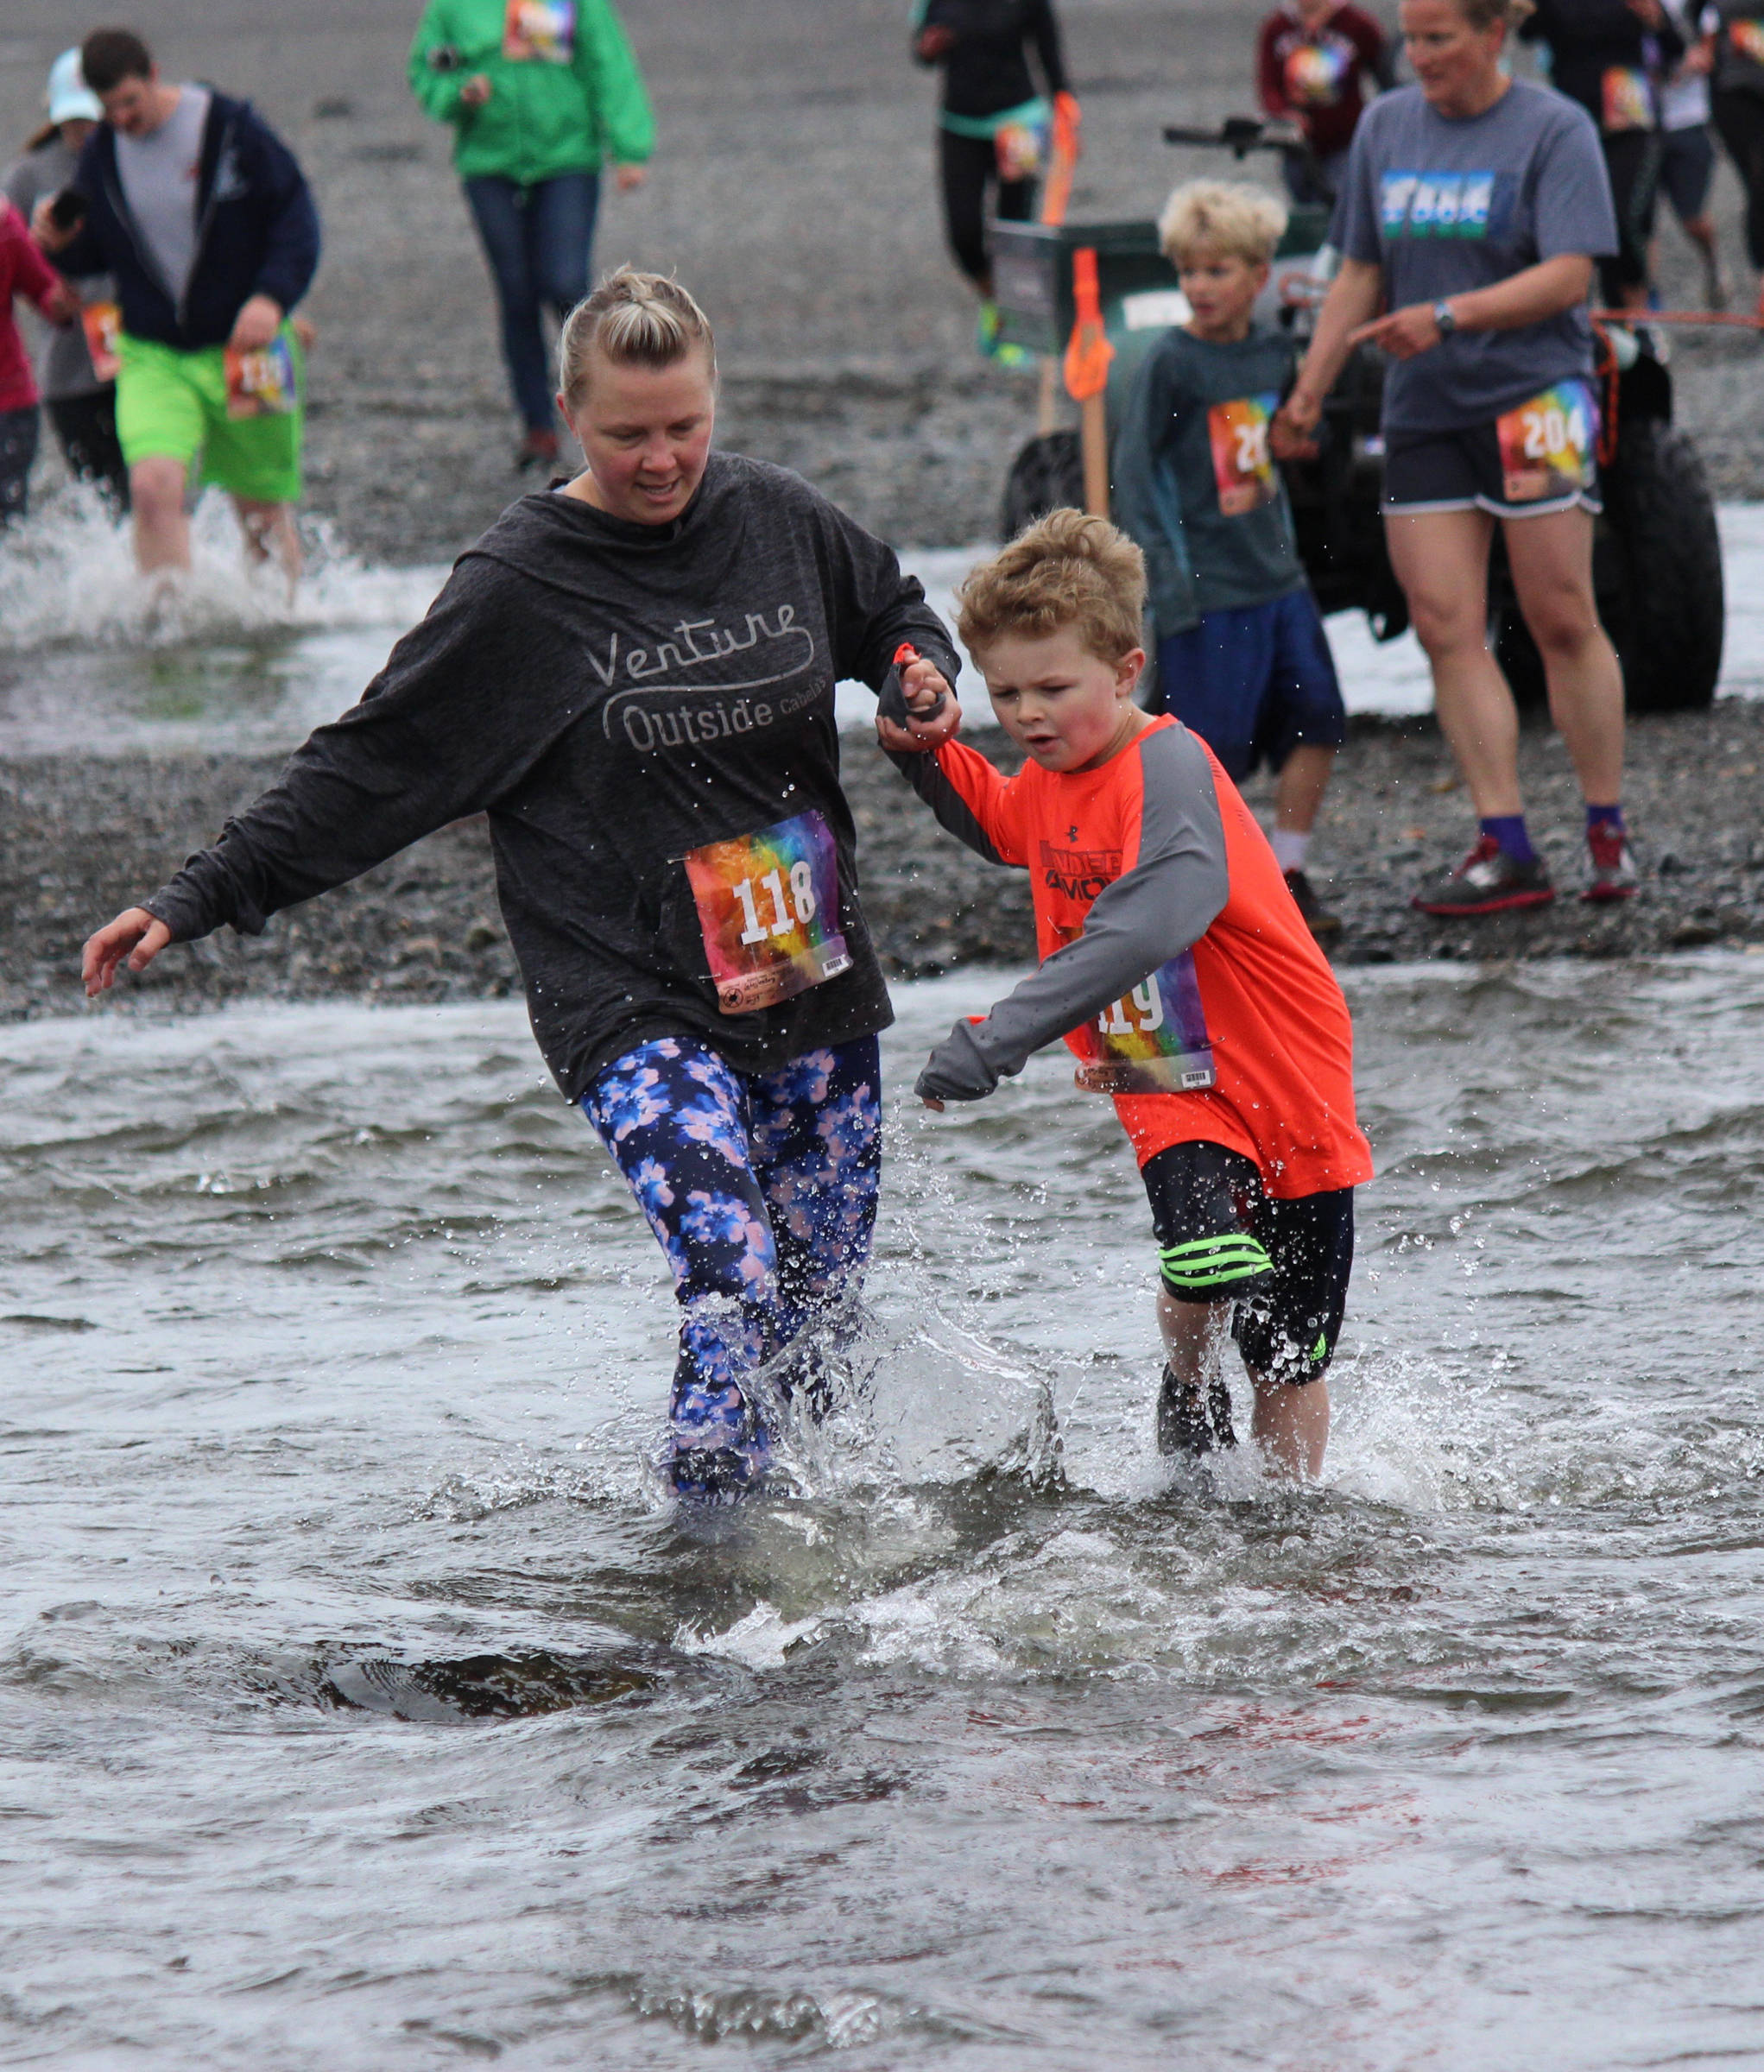 Whitney Schollenberg, 118, and Parker Schollenberg, 119, offer each other a steady hand while crossing the mouth of Deep Creek during the Clam Scramble on Saturday, June 15, 2019 in Ninilchik, Alaska. (Photo by McKibben Jackinsky)